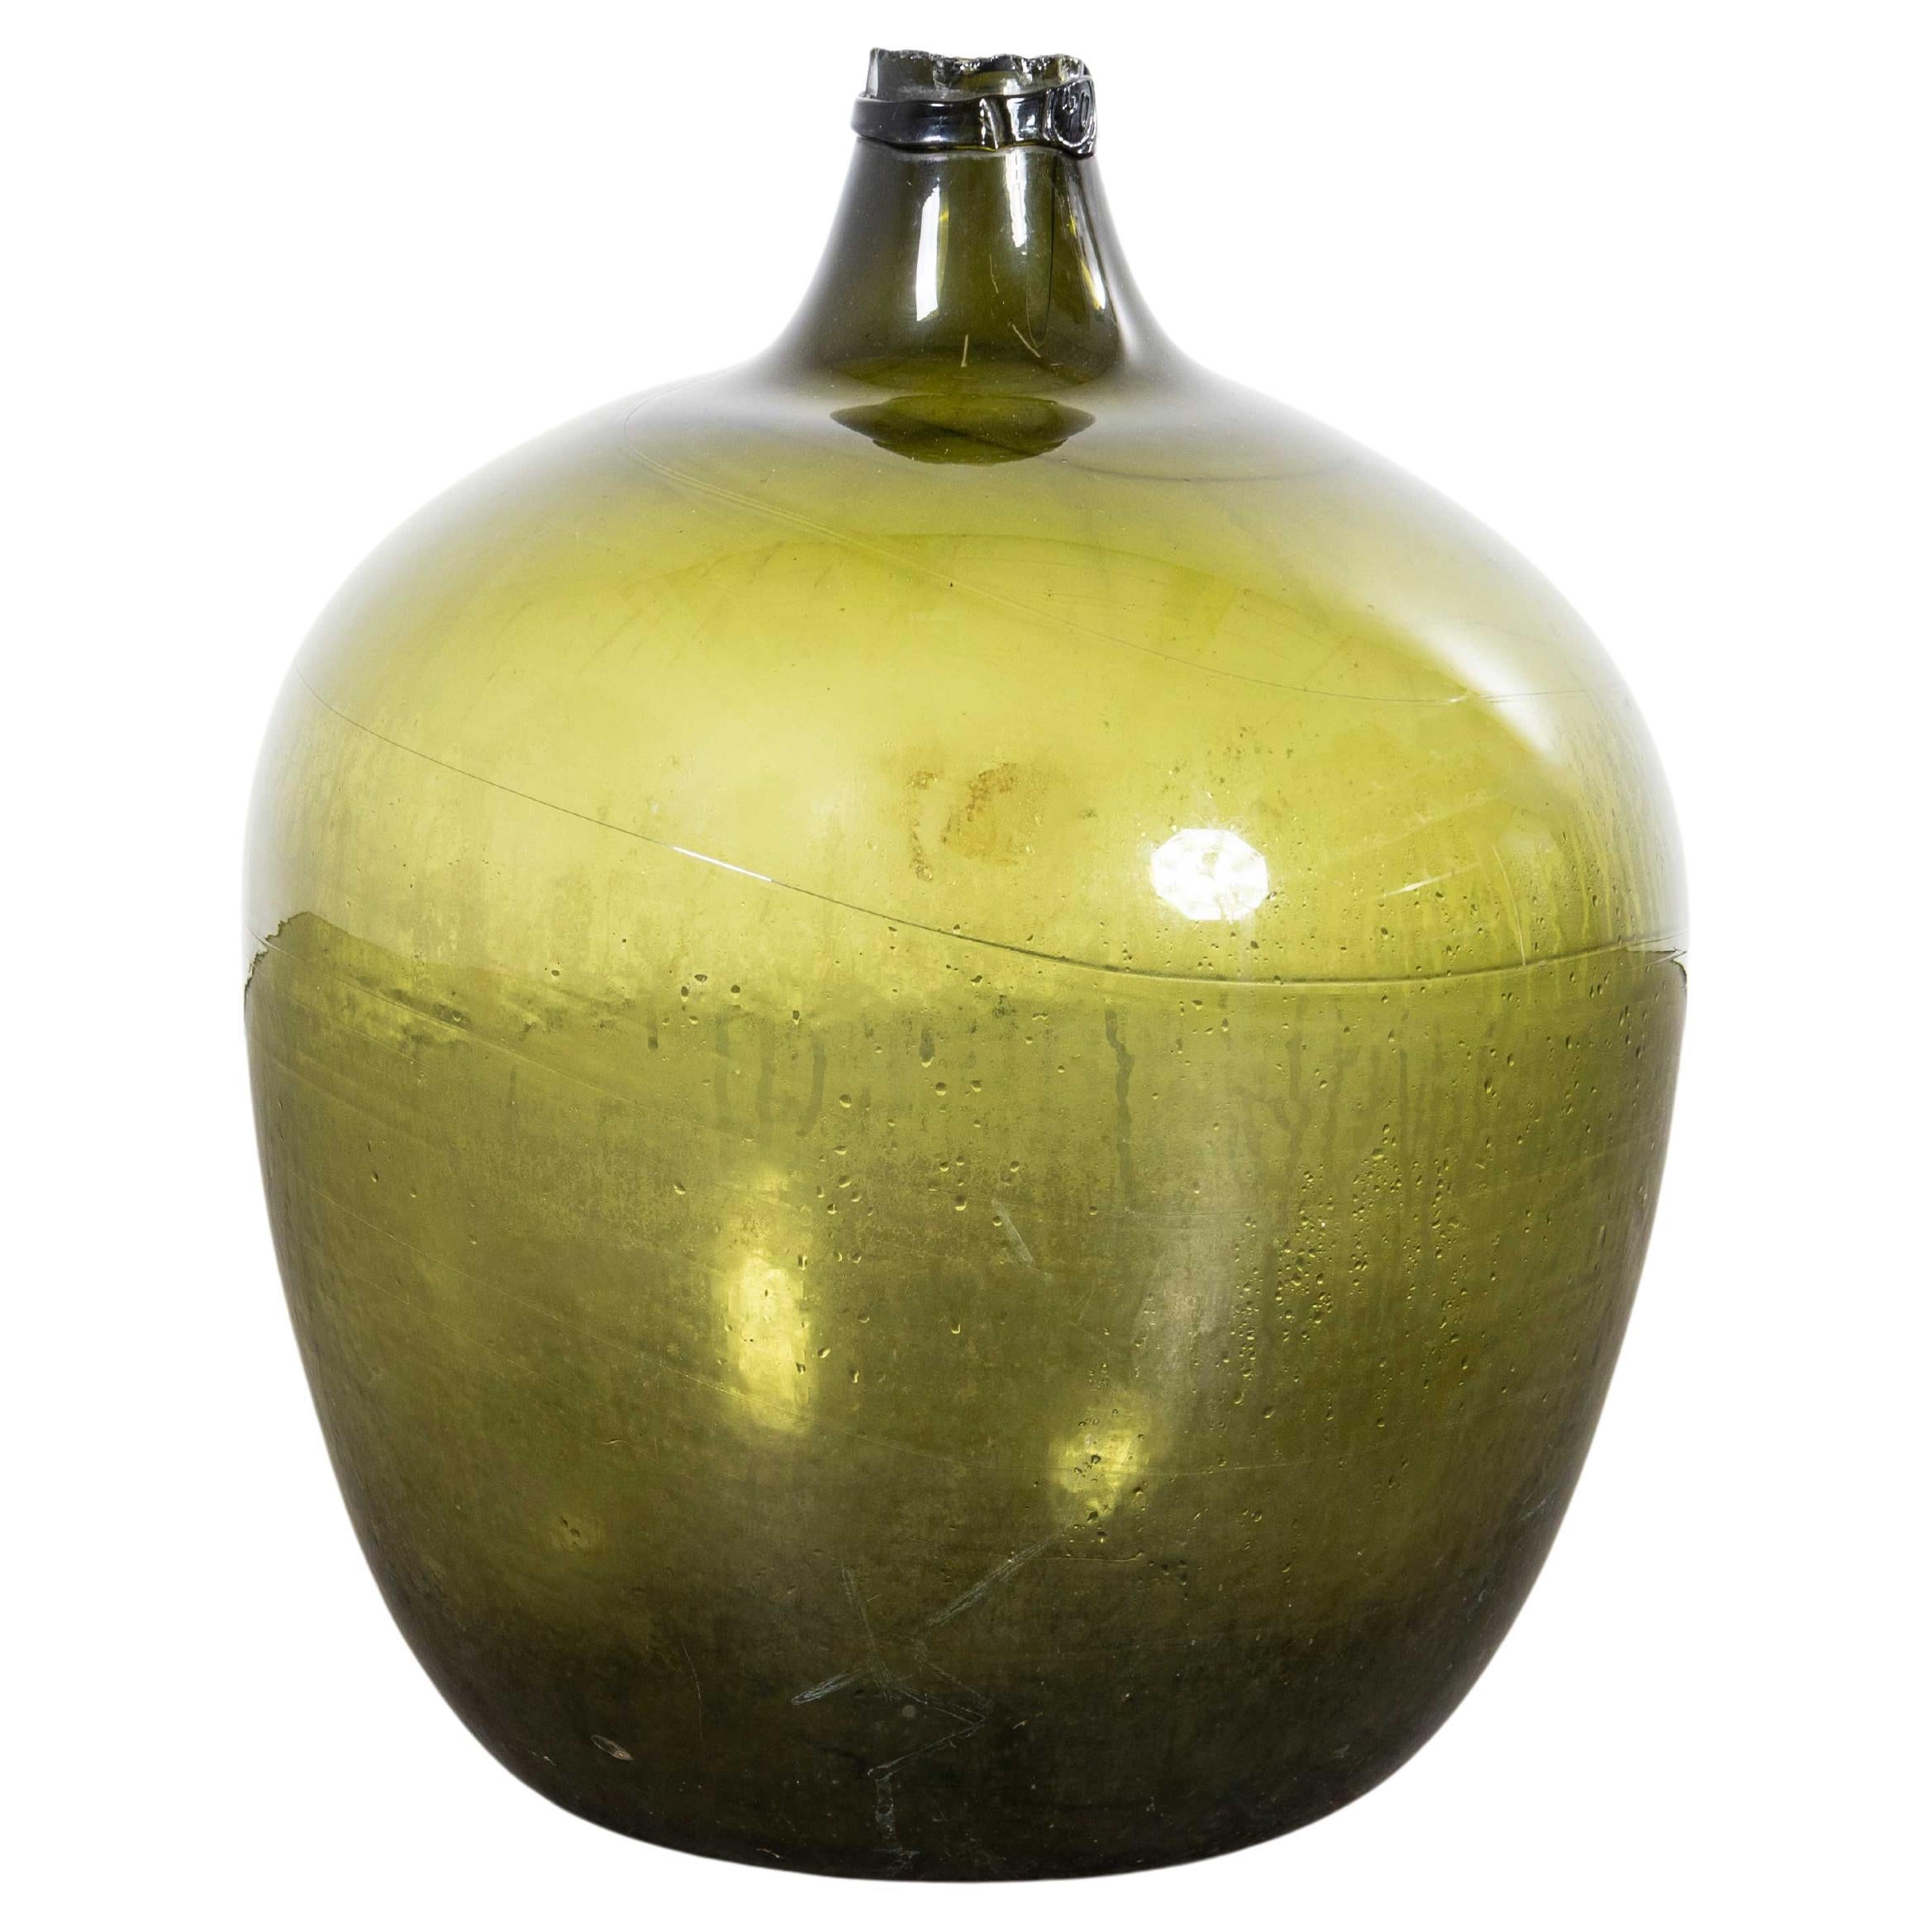 Vintage French Glass Demijohn - Very Large (957.15)